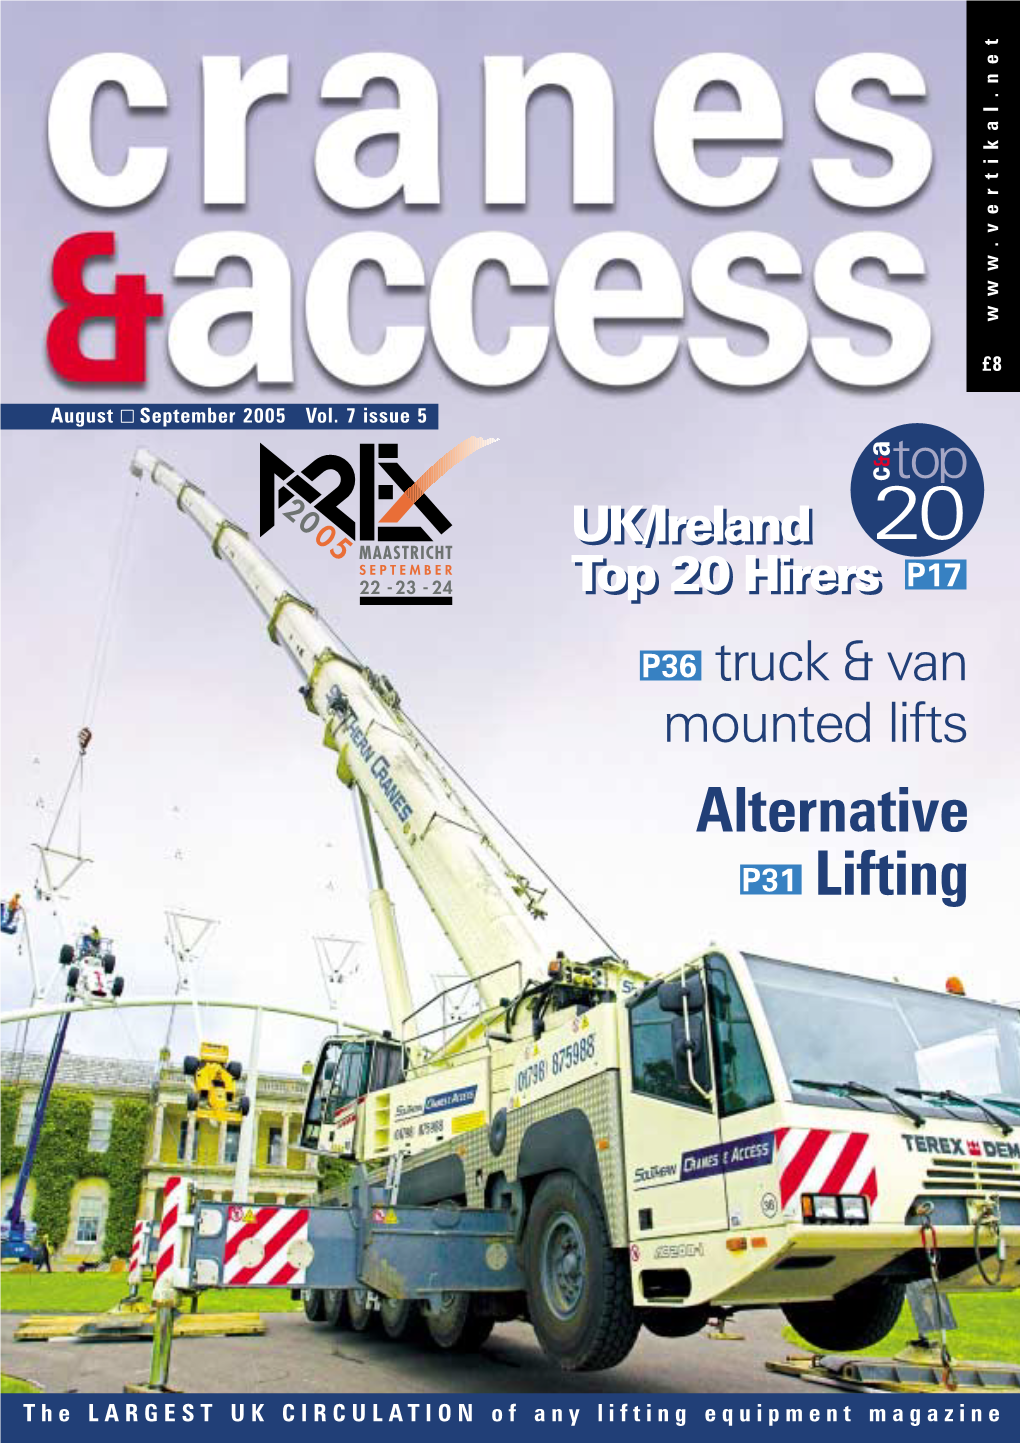 Alternative Lifting ALLMI Focus 39 SUBSCRIPTIONS: Cranes & Access Is Published Seven Times a Year and Is Available on Payment of an Annual Subscription of £40.00